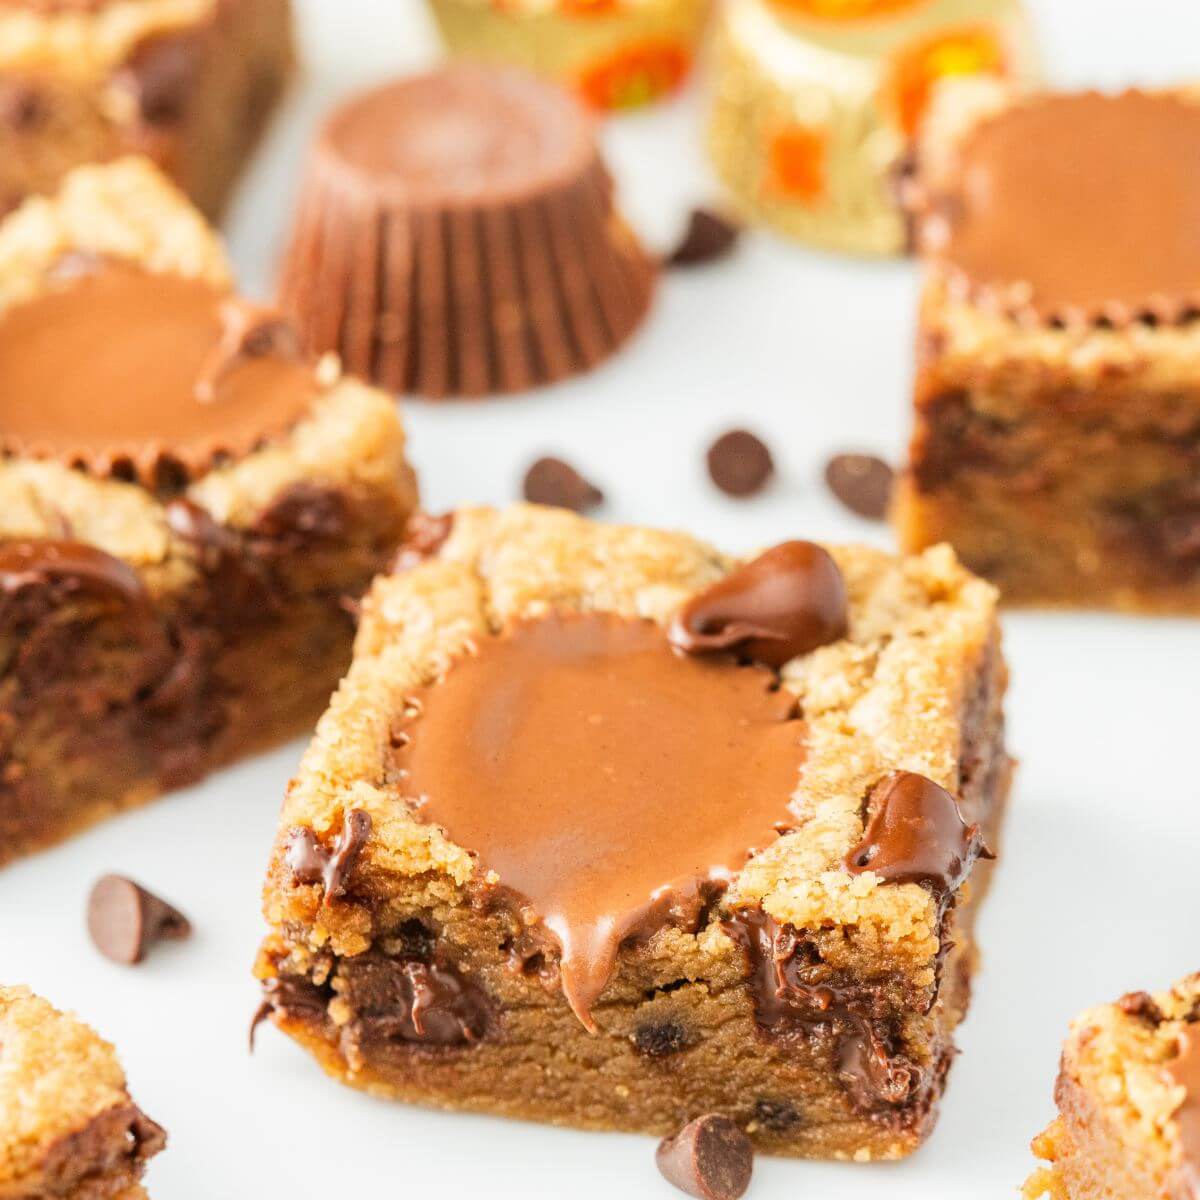 Blondies are artfully displayed with peanut butter cups.